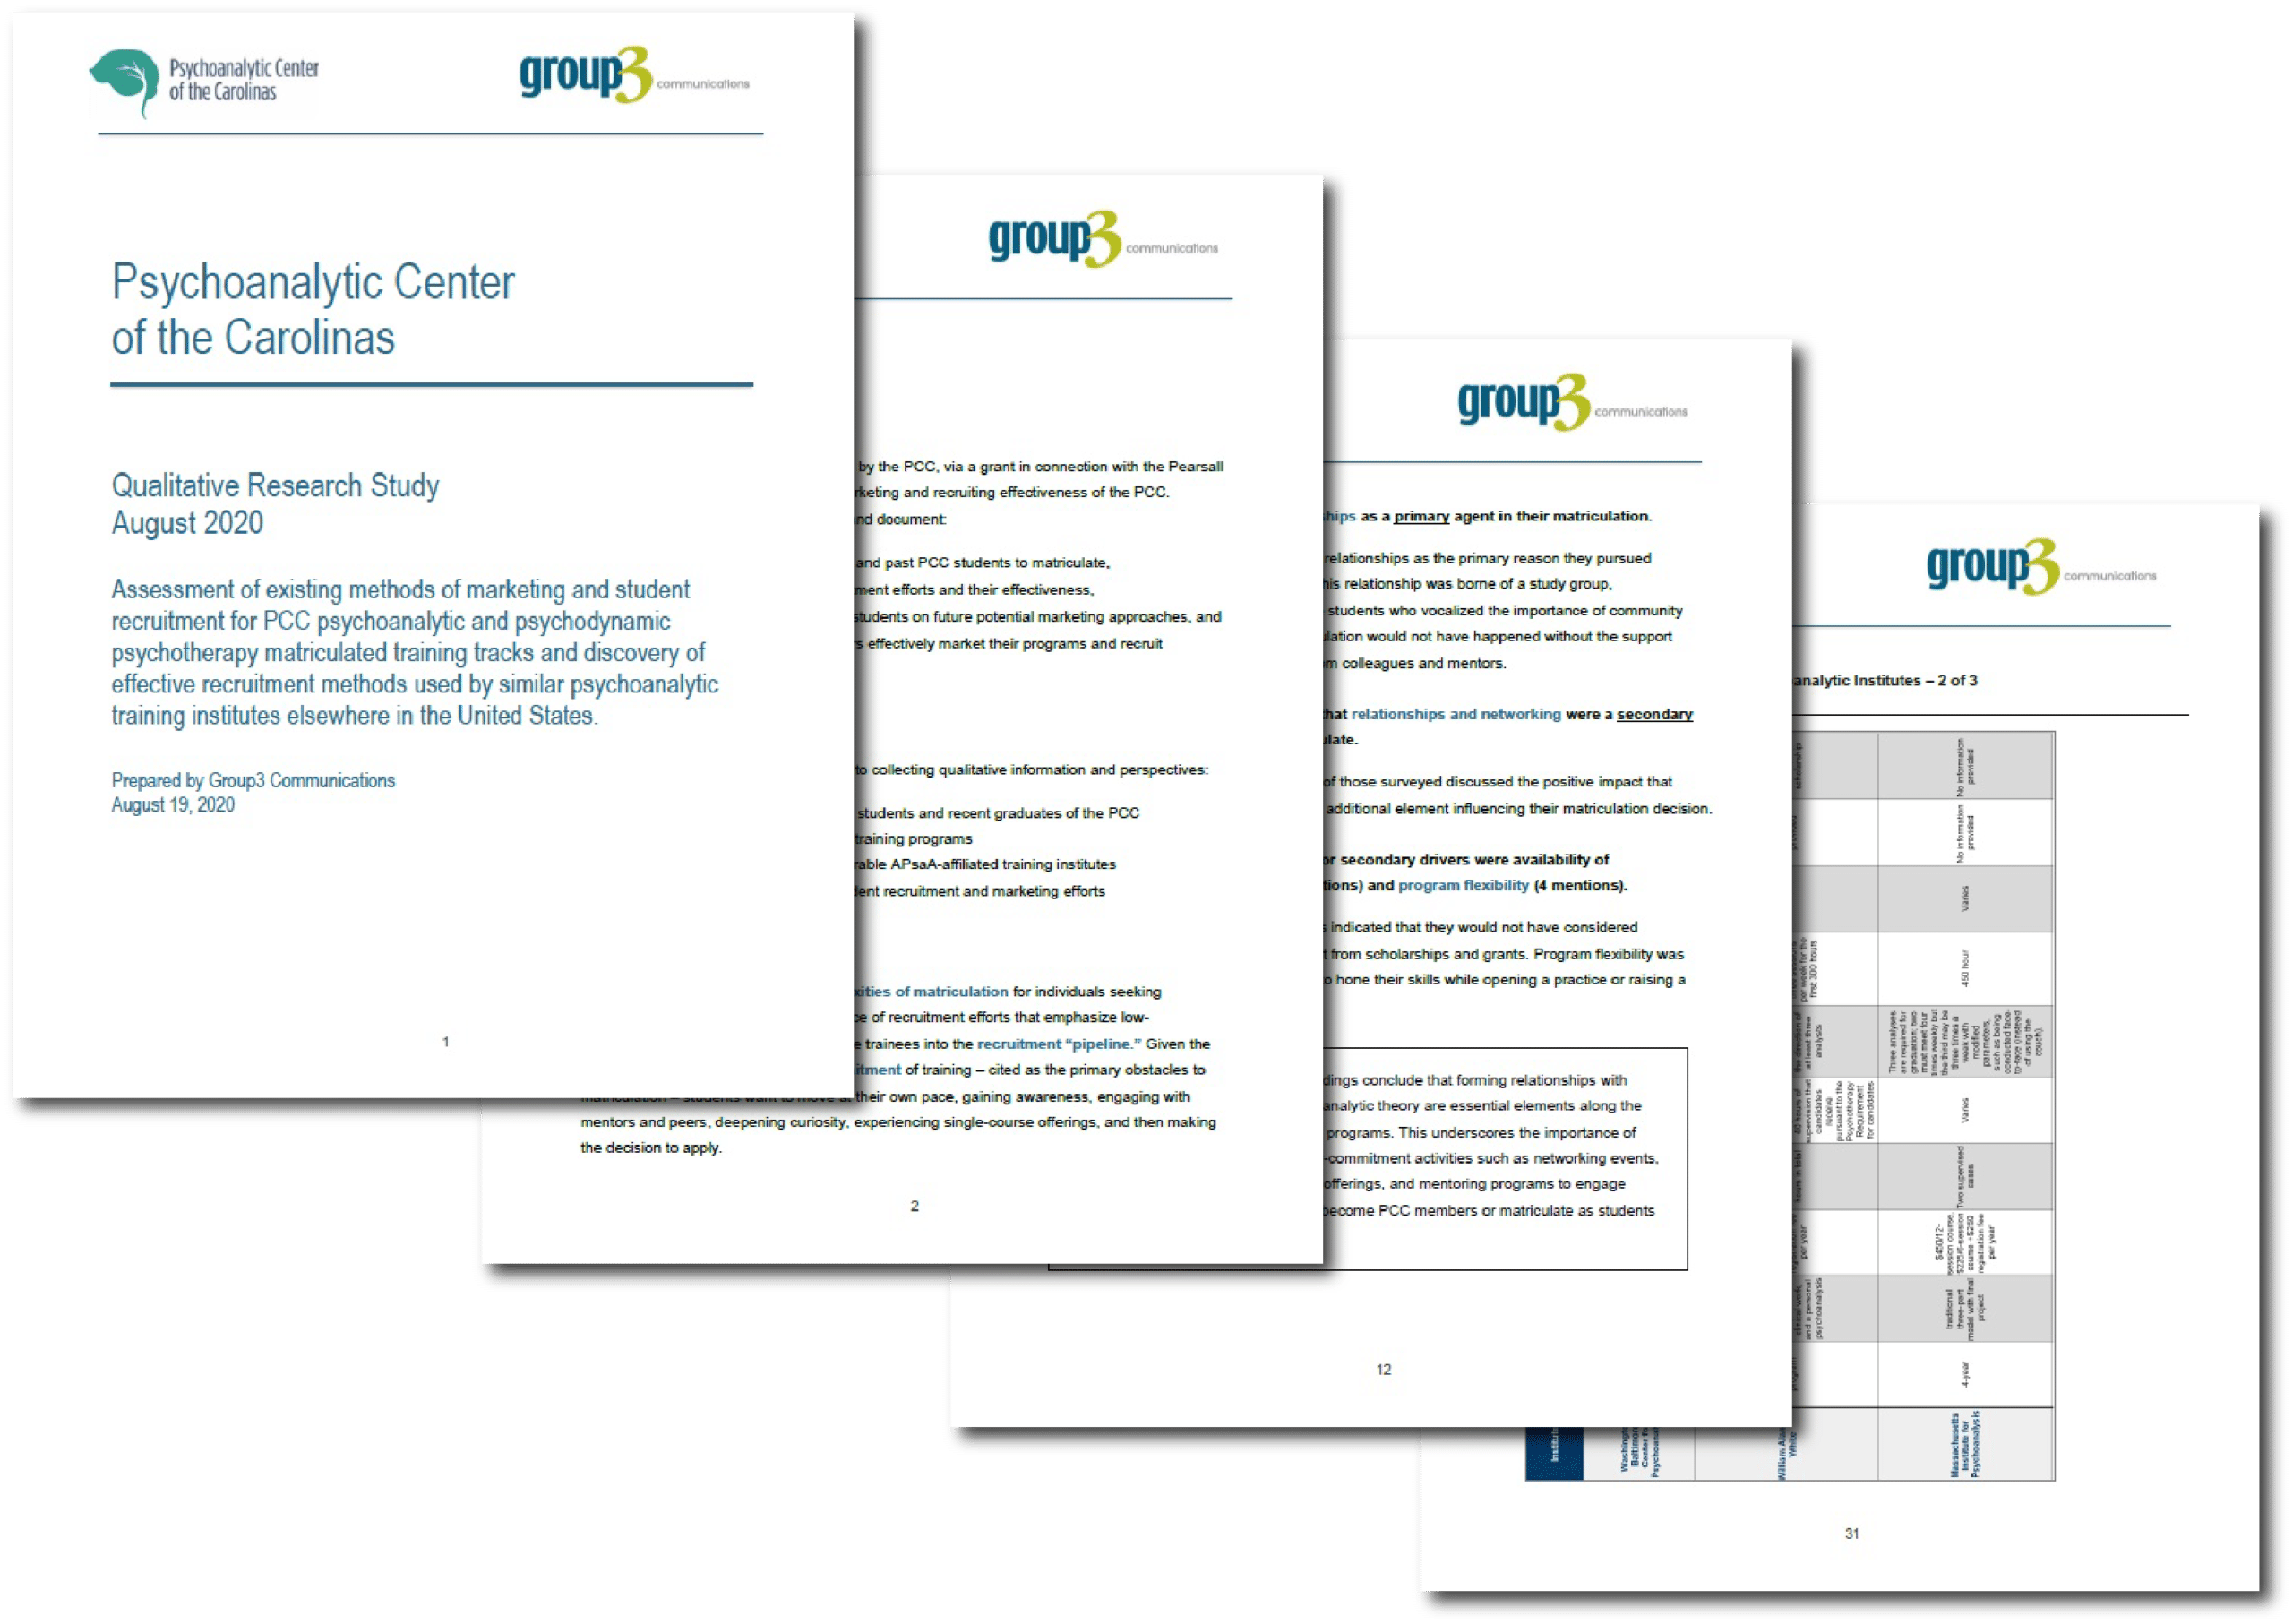 market research firms - sample pages from a market research report for the PCC